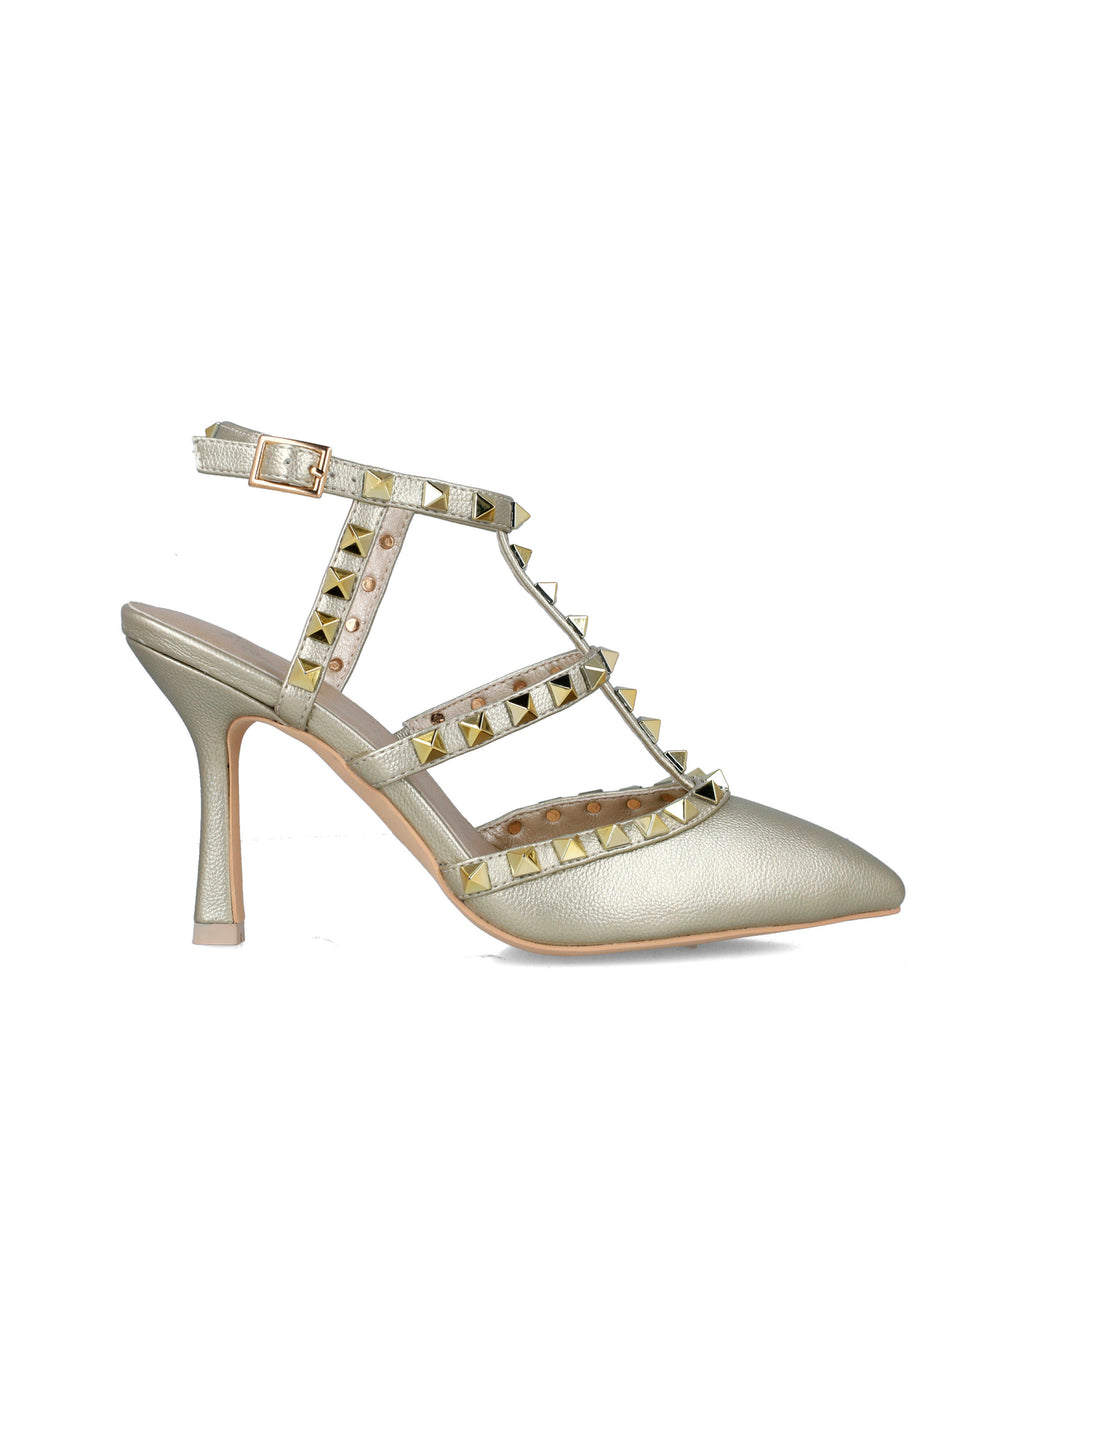 Gold Studded Pumps With T-Strap_24915_00_01